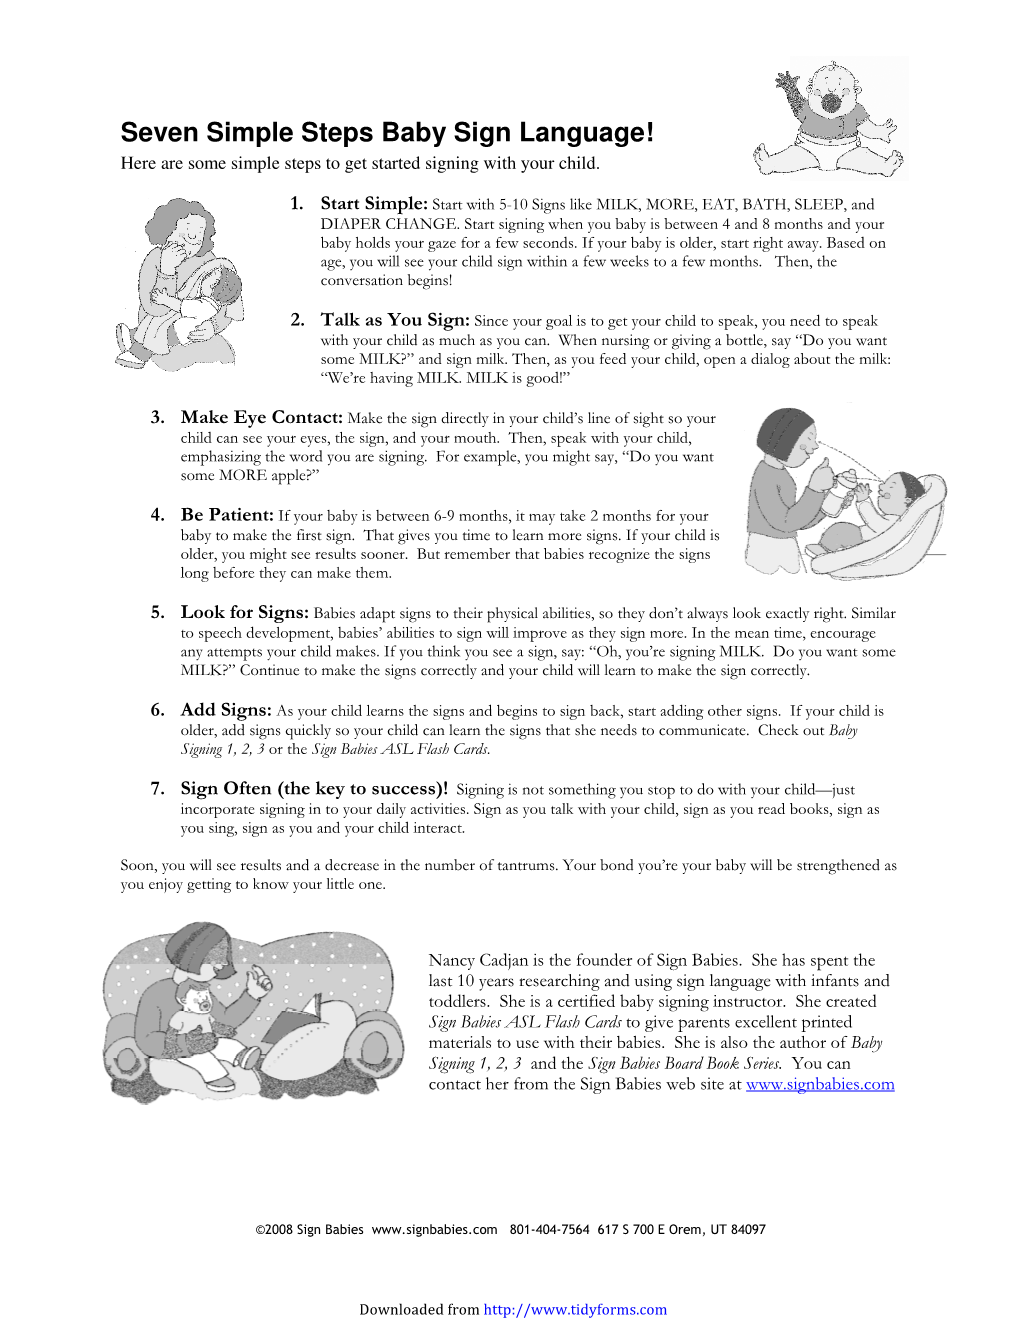 Seven Simple Steps Baby Sign Language! Here Are Some Simple Steps to Get Started Signing with Your Child